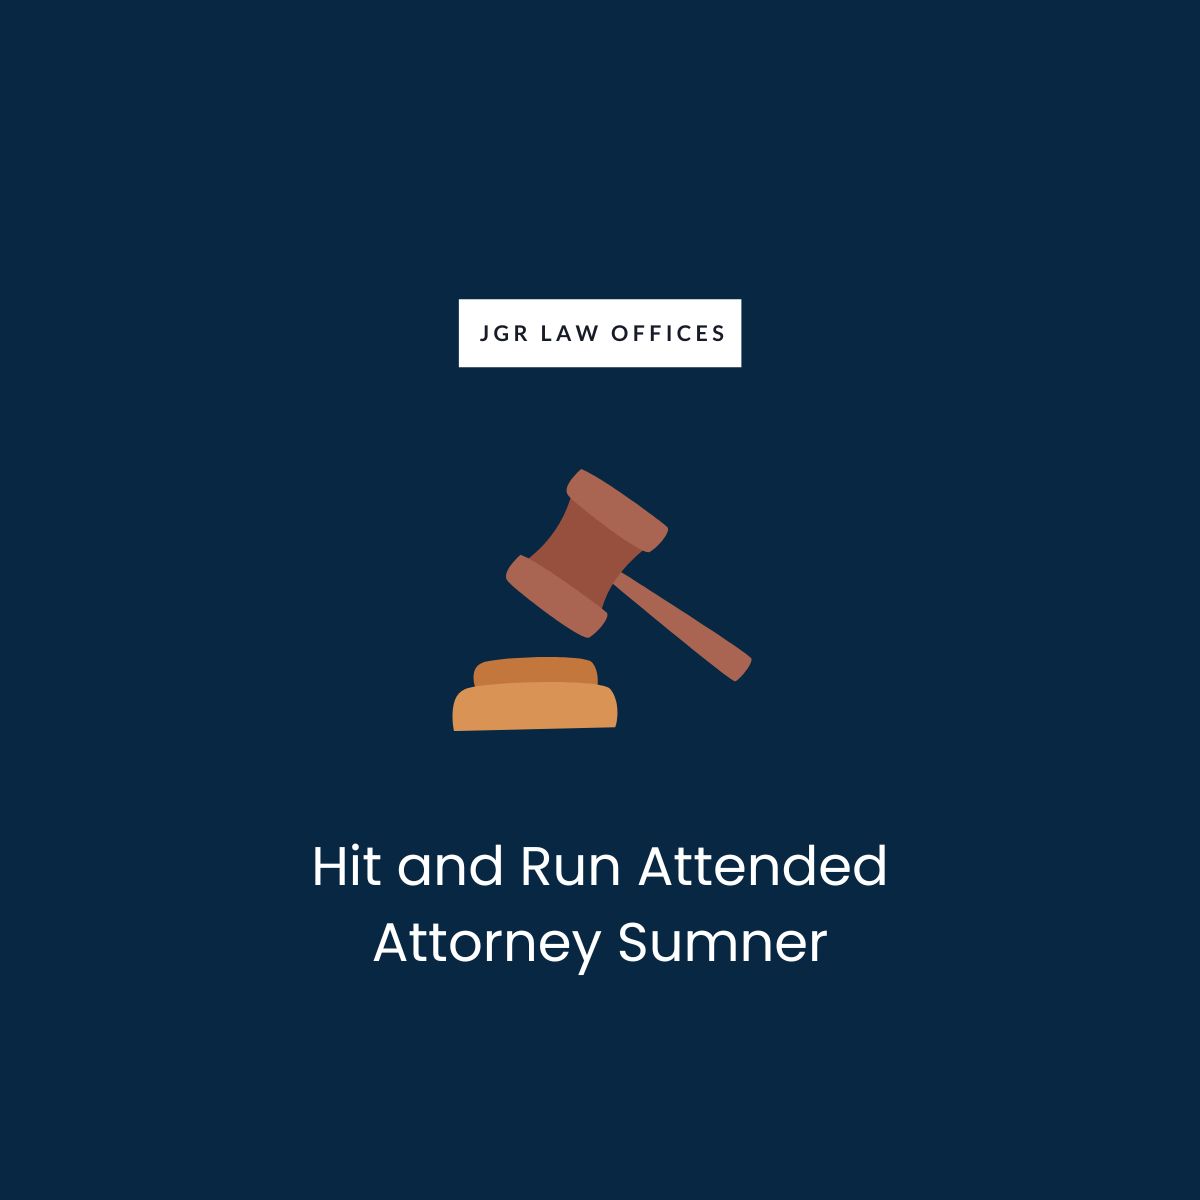 Hit and Run Attended Attorney Sumner